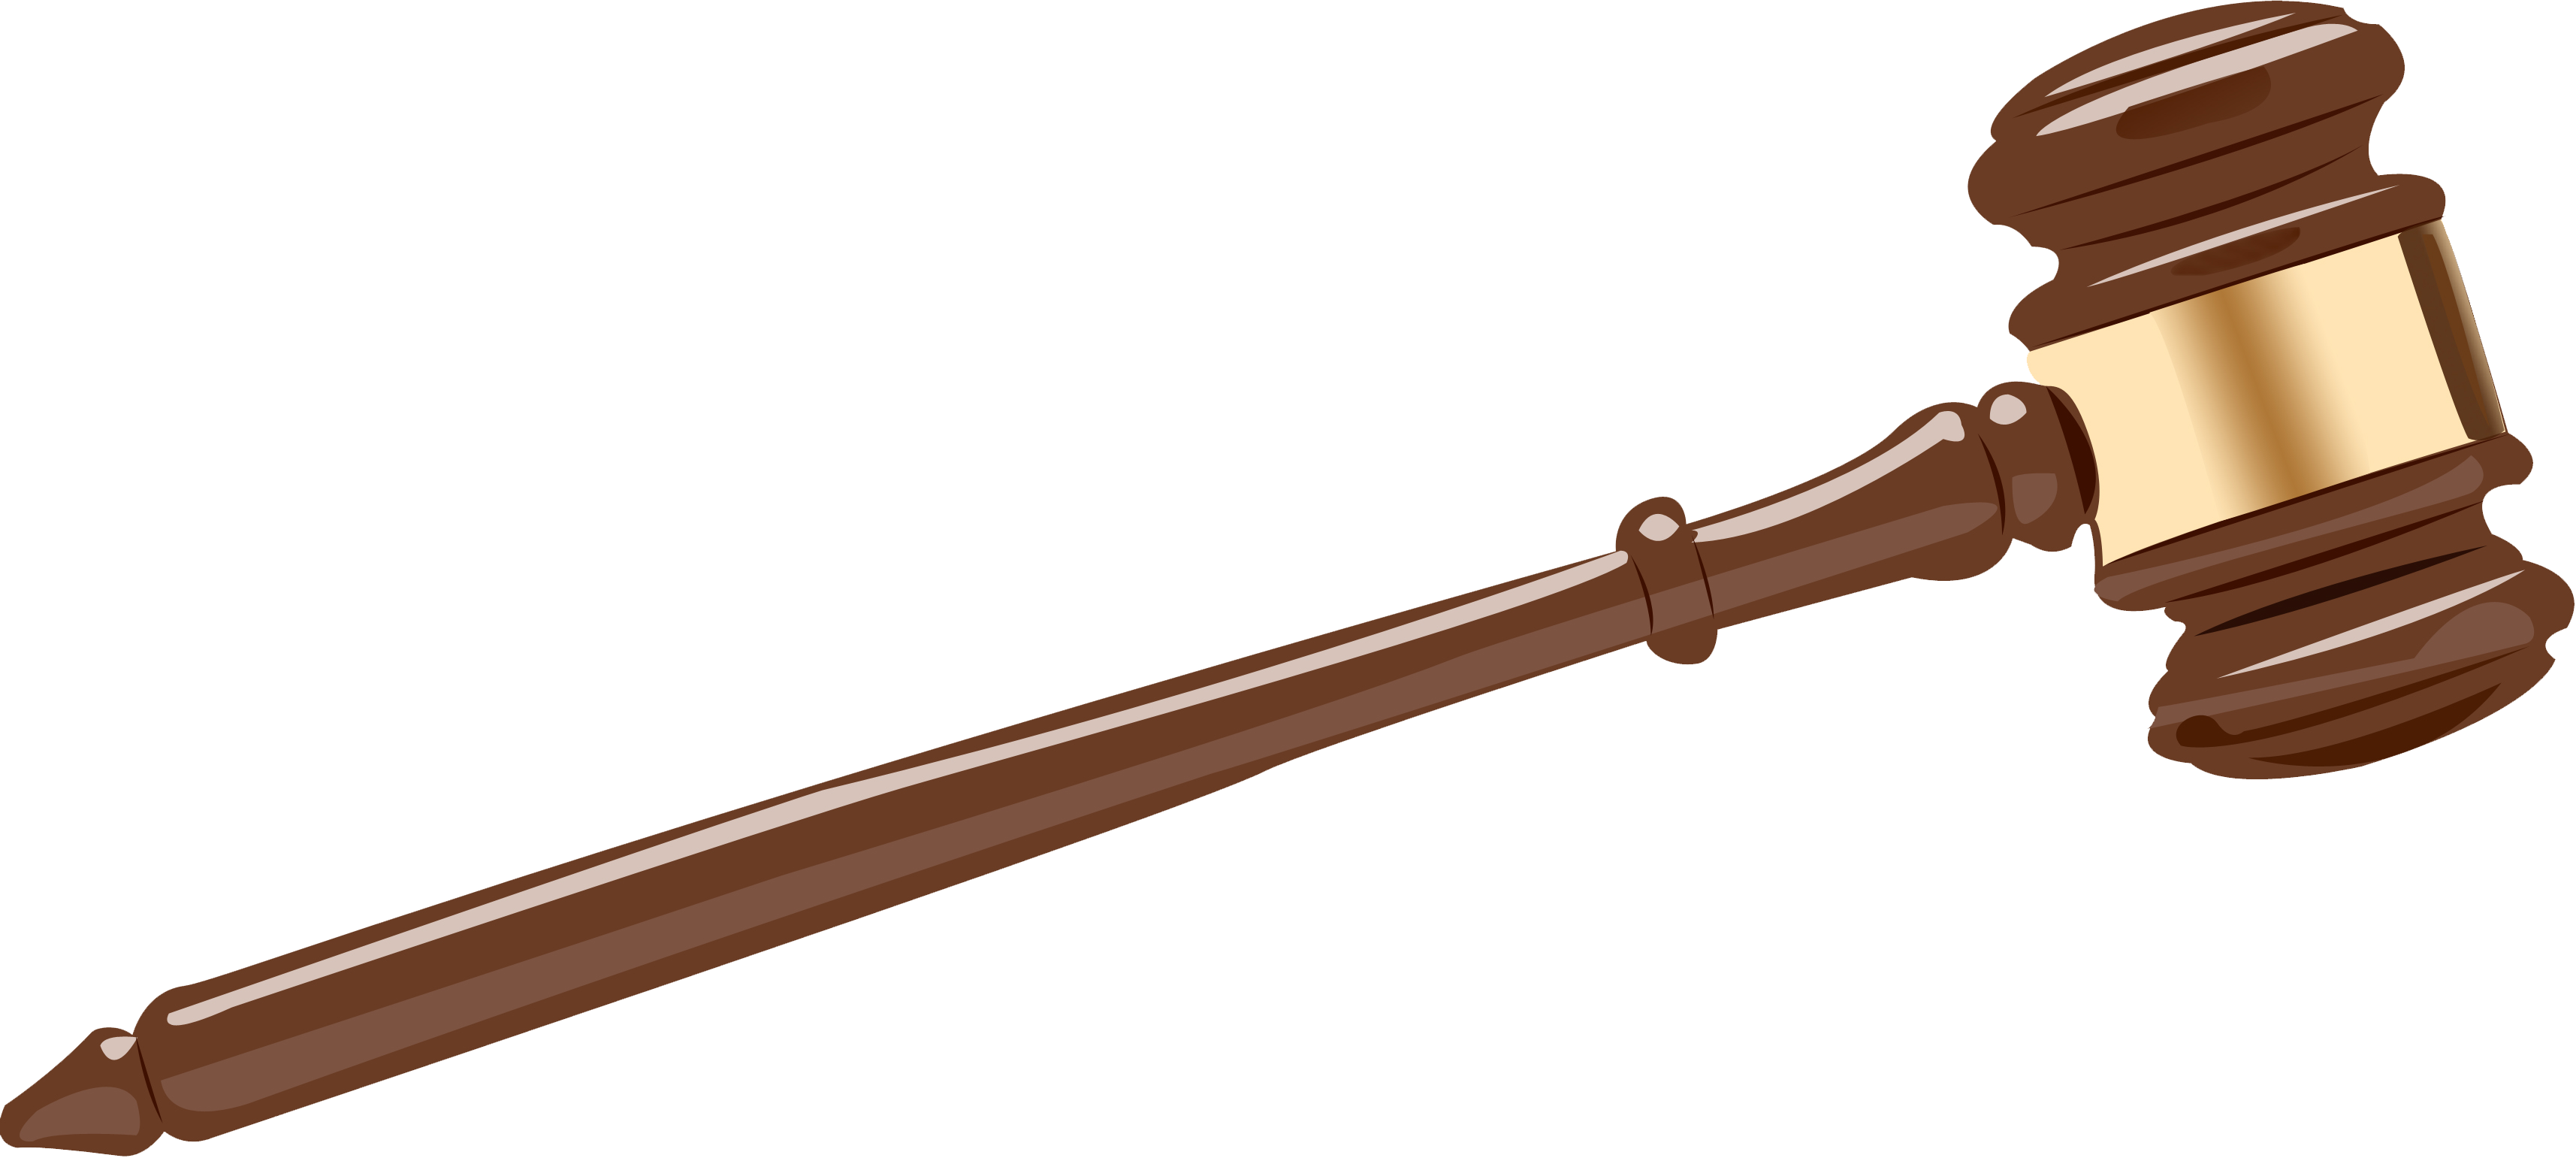 Gavel Court Hammer PNG HD Quality